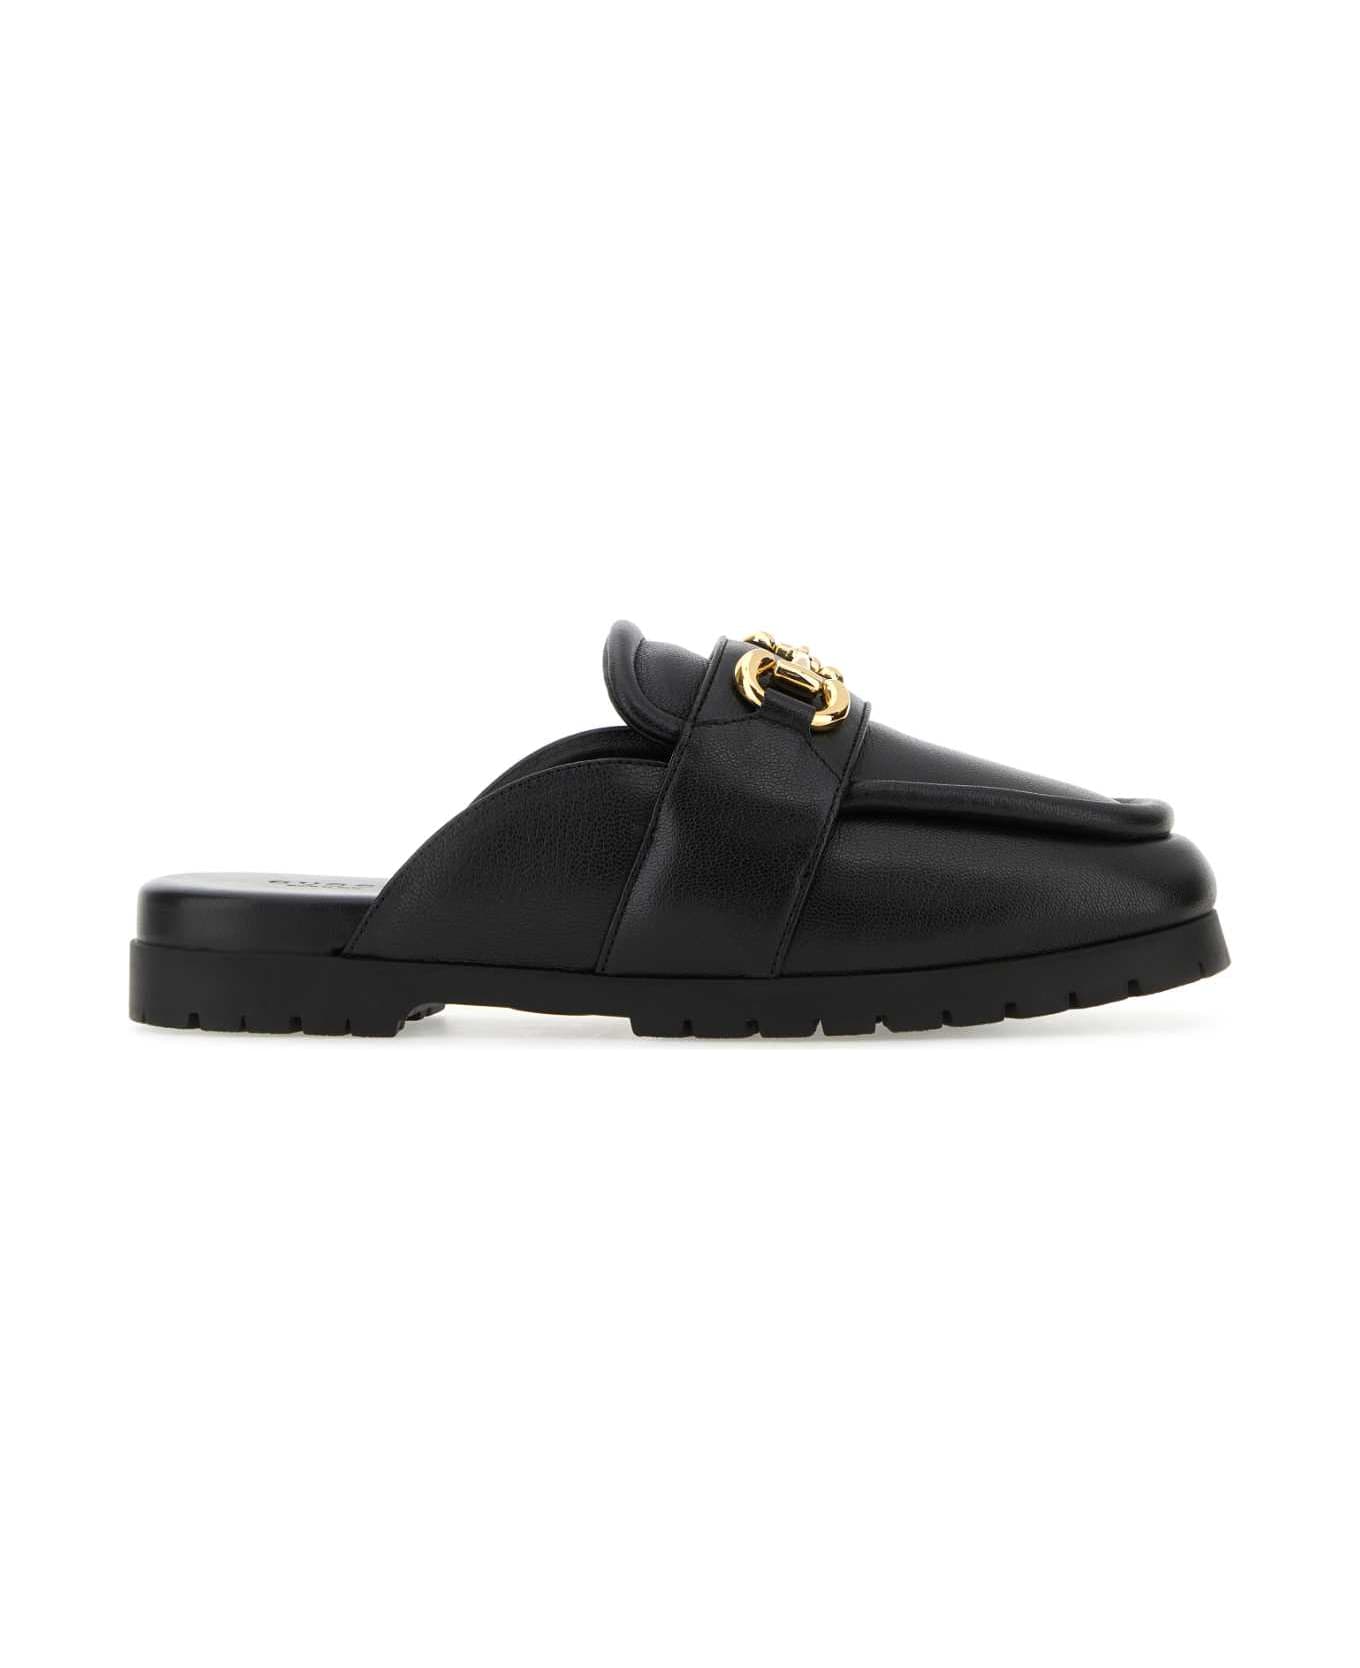 Gucci Black Leather Slippers - Black